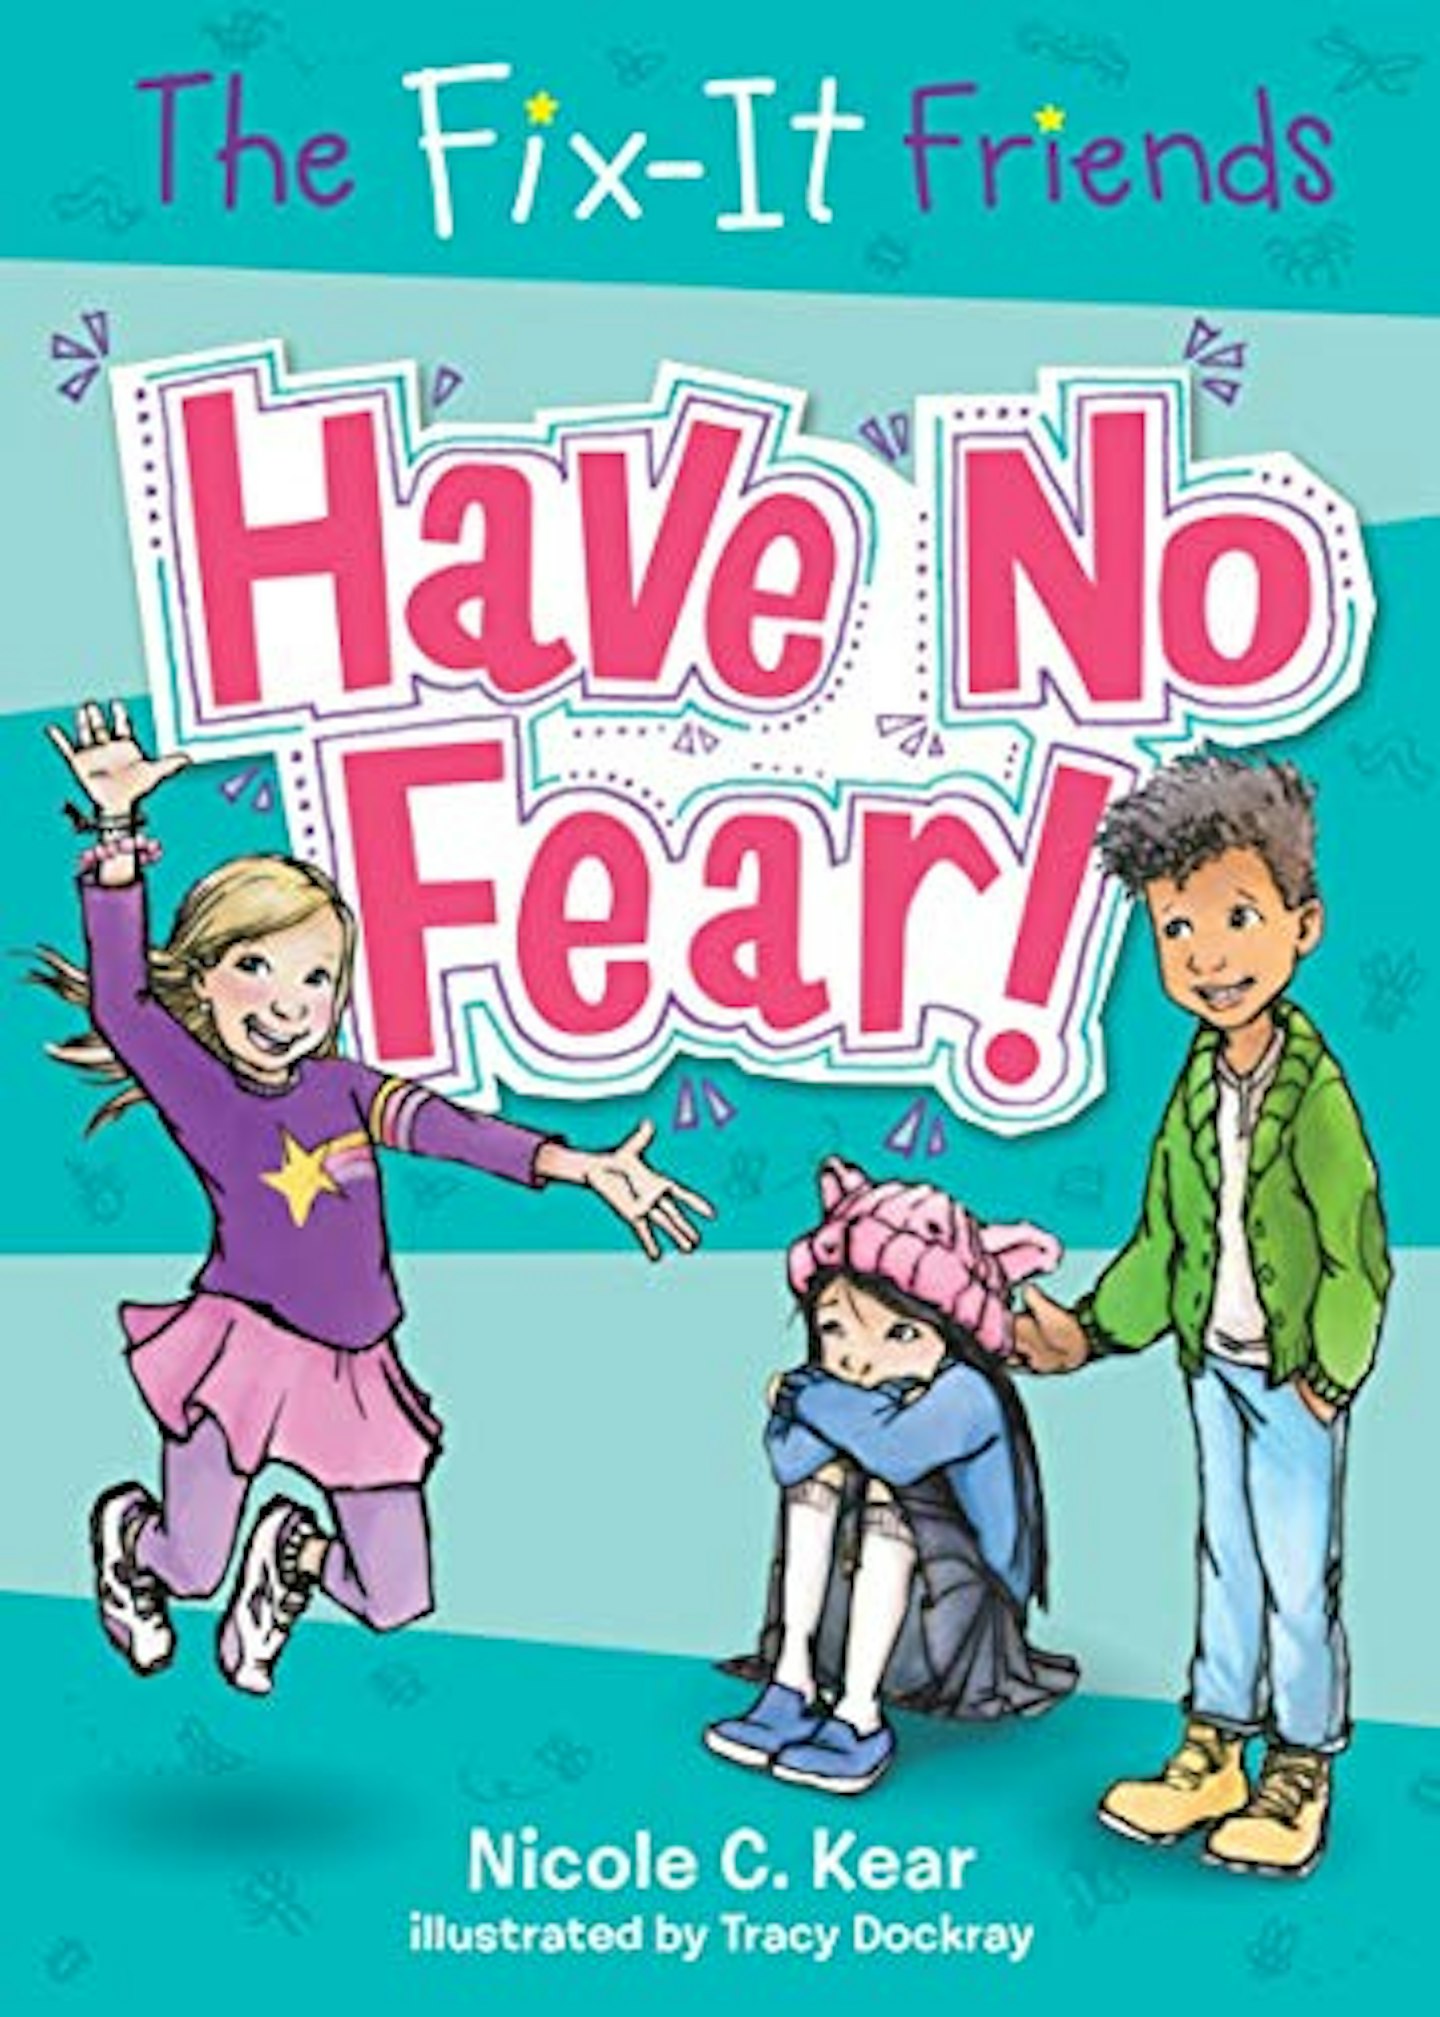 The Fix-It Friends: Have No Fear! – Nicole C. Kear and Tracy Dockray